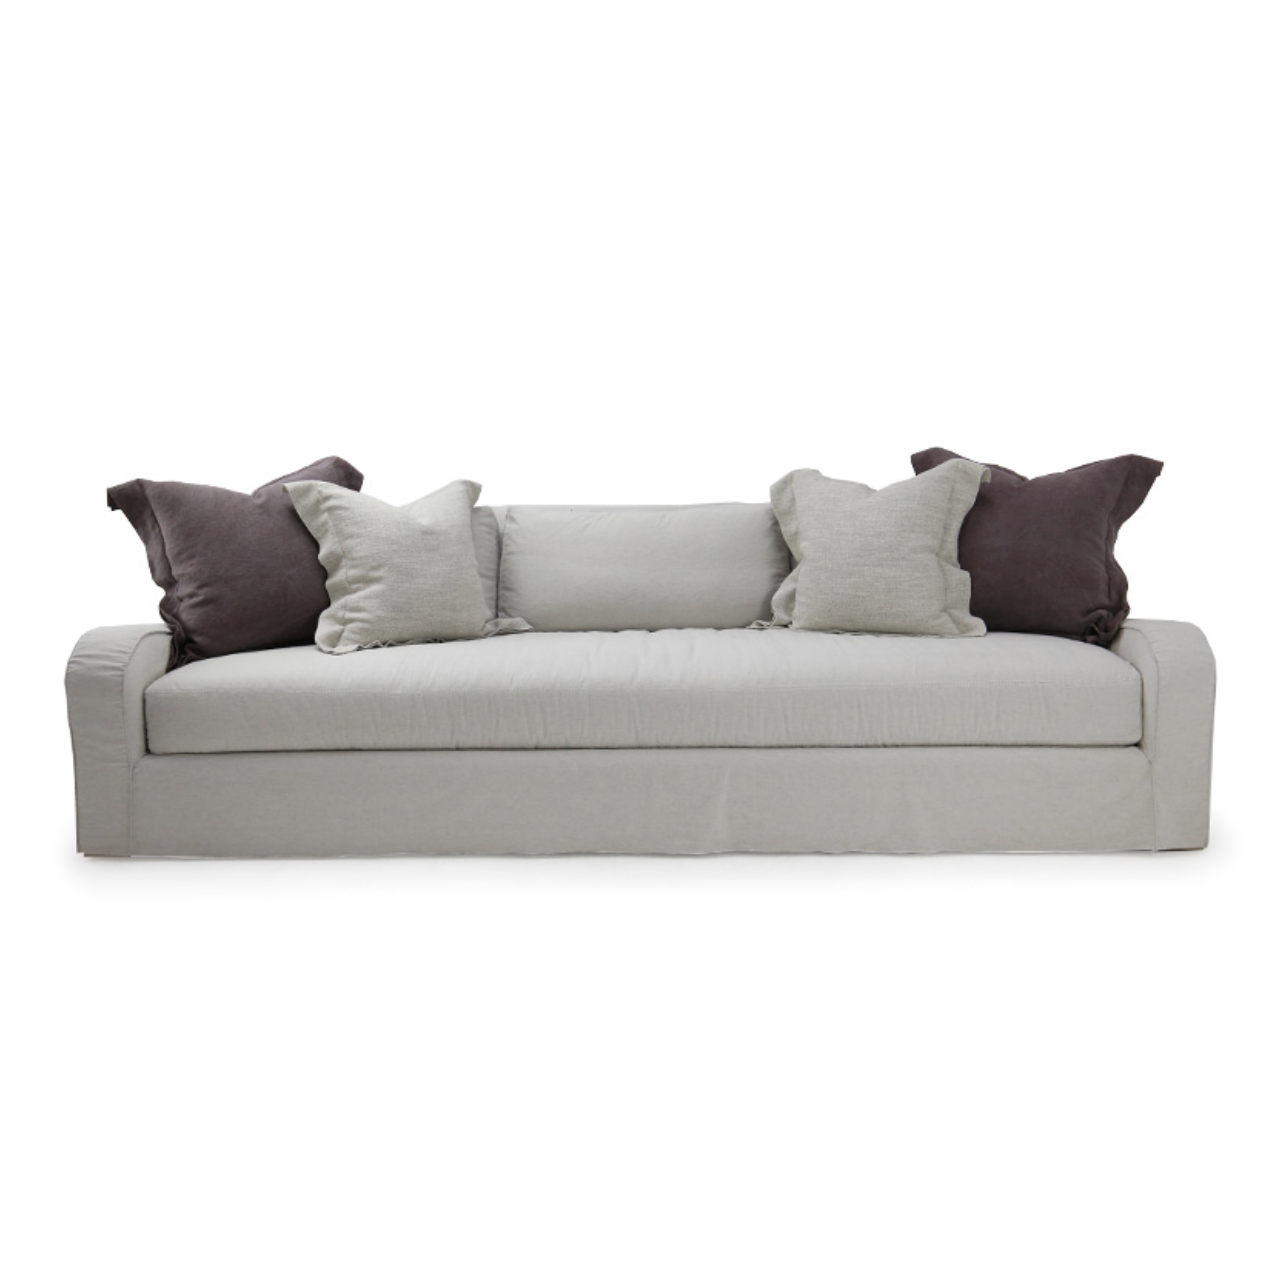 The beautiful, sloping arms of Verellen's Sloane Sofa Family will suit any environment! Standard options include:  • Spring Down Seat Construction • Loose Bench Seat • Boxed Back Pillows • Knife Edge Toss • Double Needle • Slipcovered and Upholstered Available • Recessed Legs • Available as a Sectional – Please see Sectional Guide